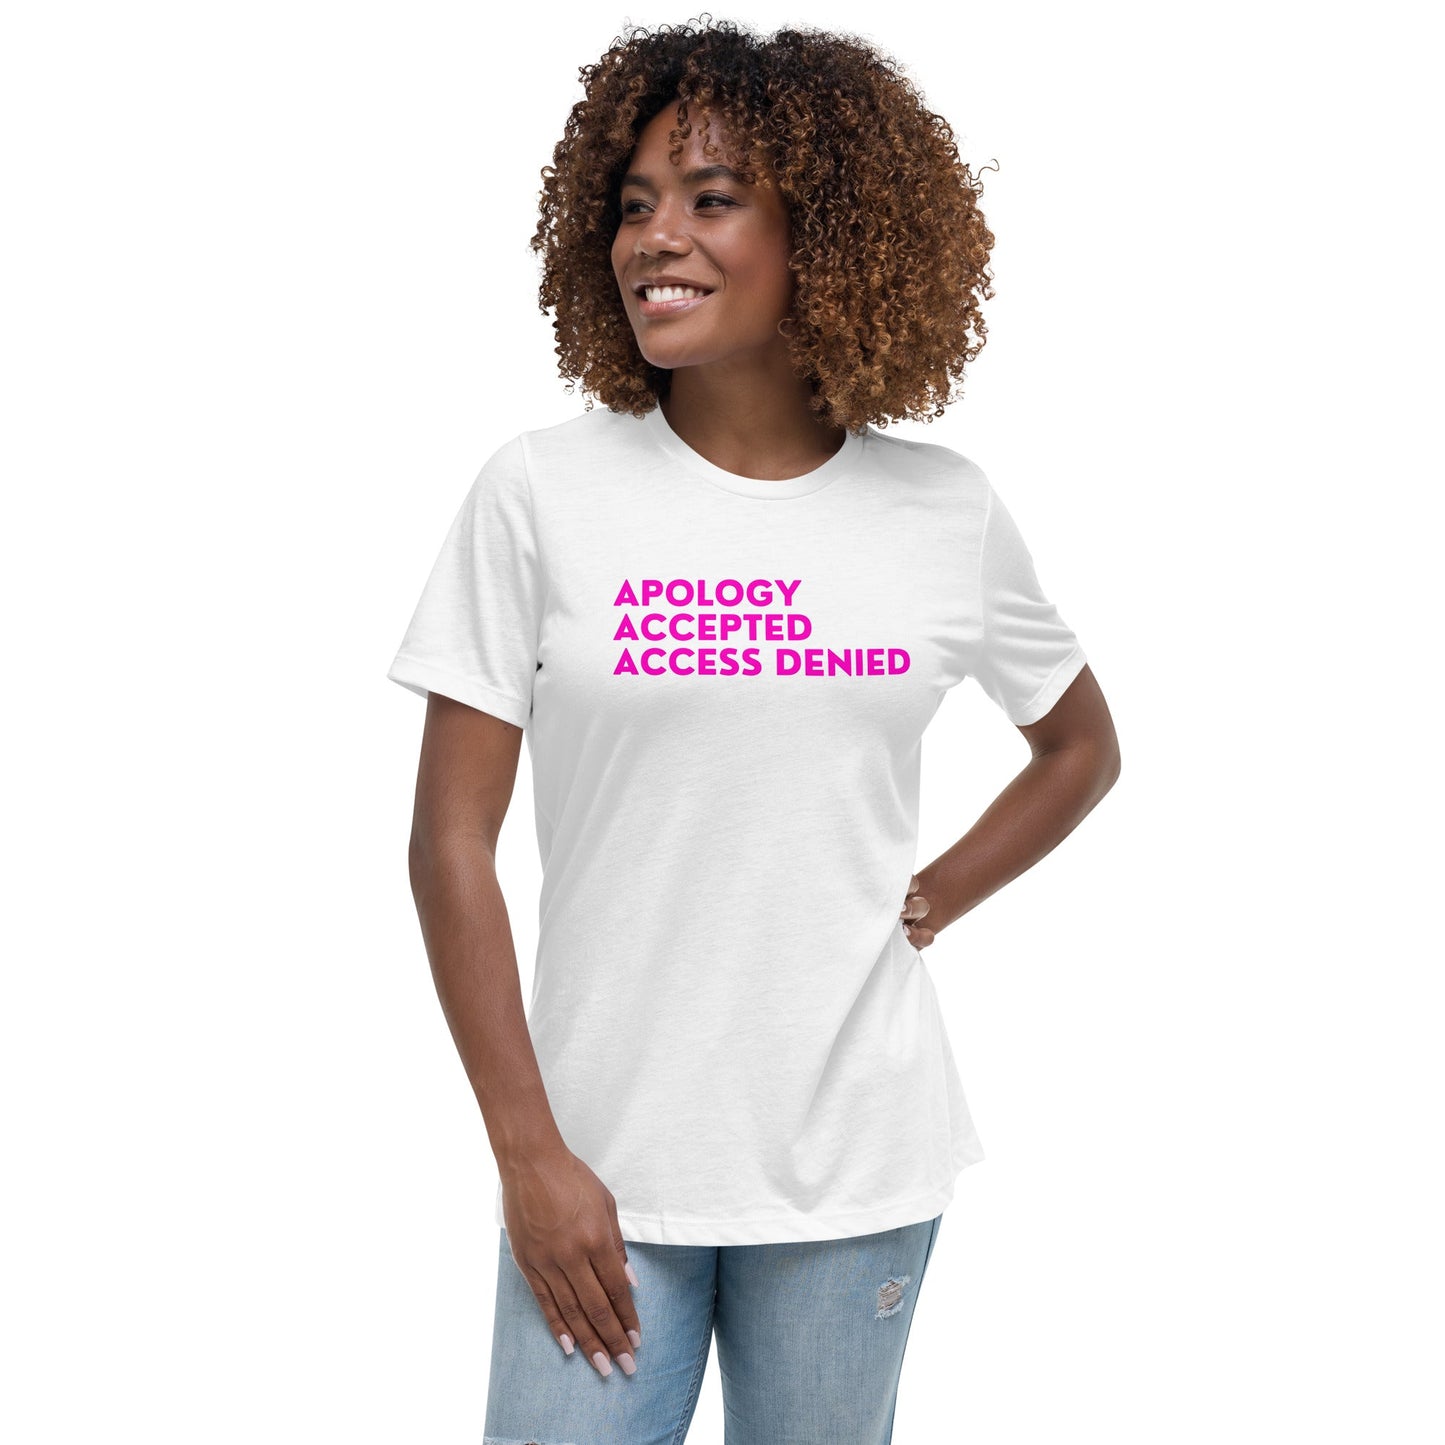 Apology Accepted Access Denied Women's Relaxed T-Shirt - Catch This Tea Shirts